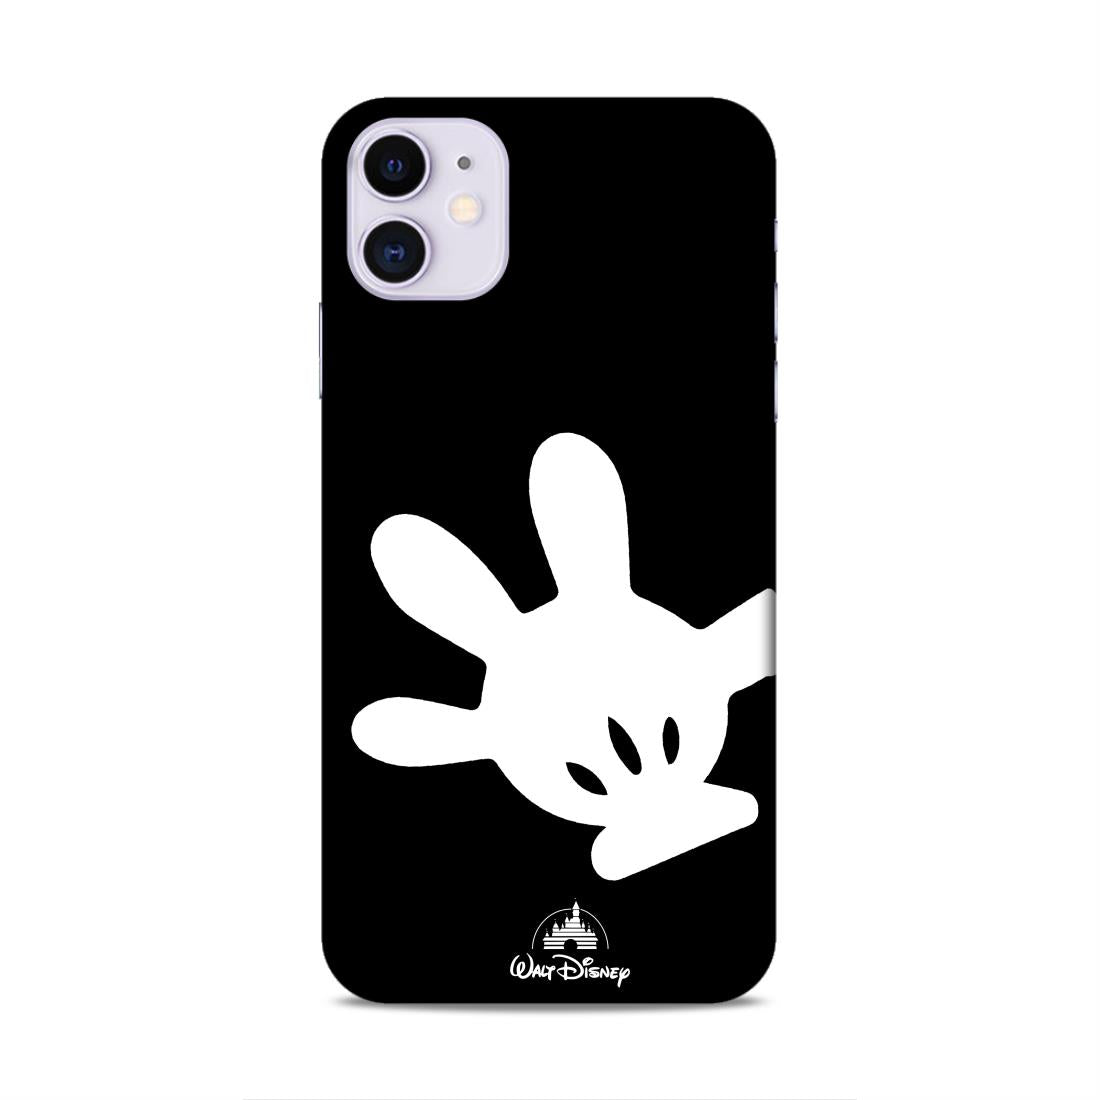 Micky Hand Hard Back Case For Apple iPhone 11